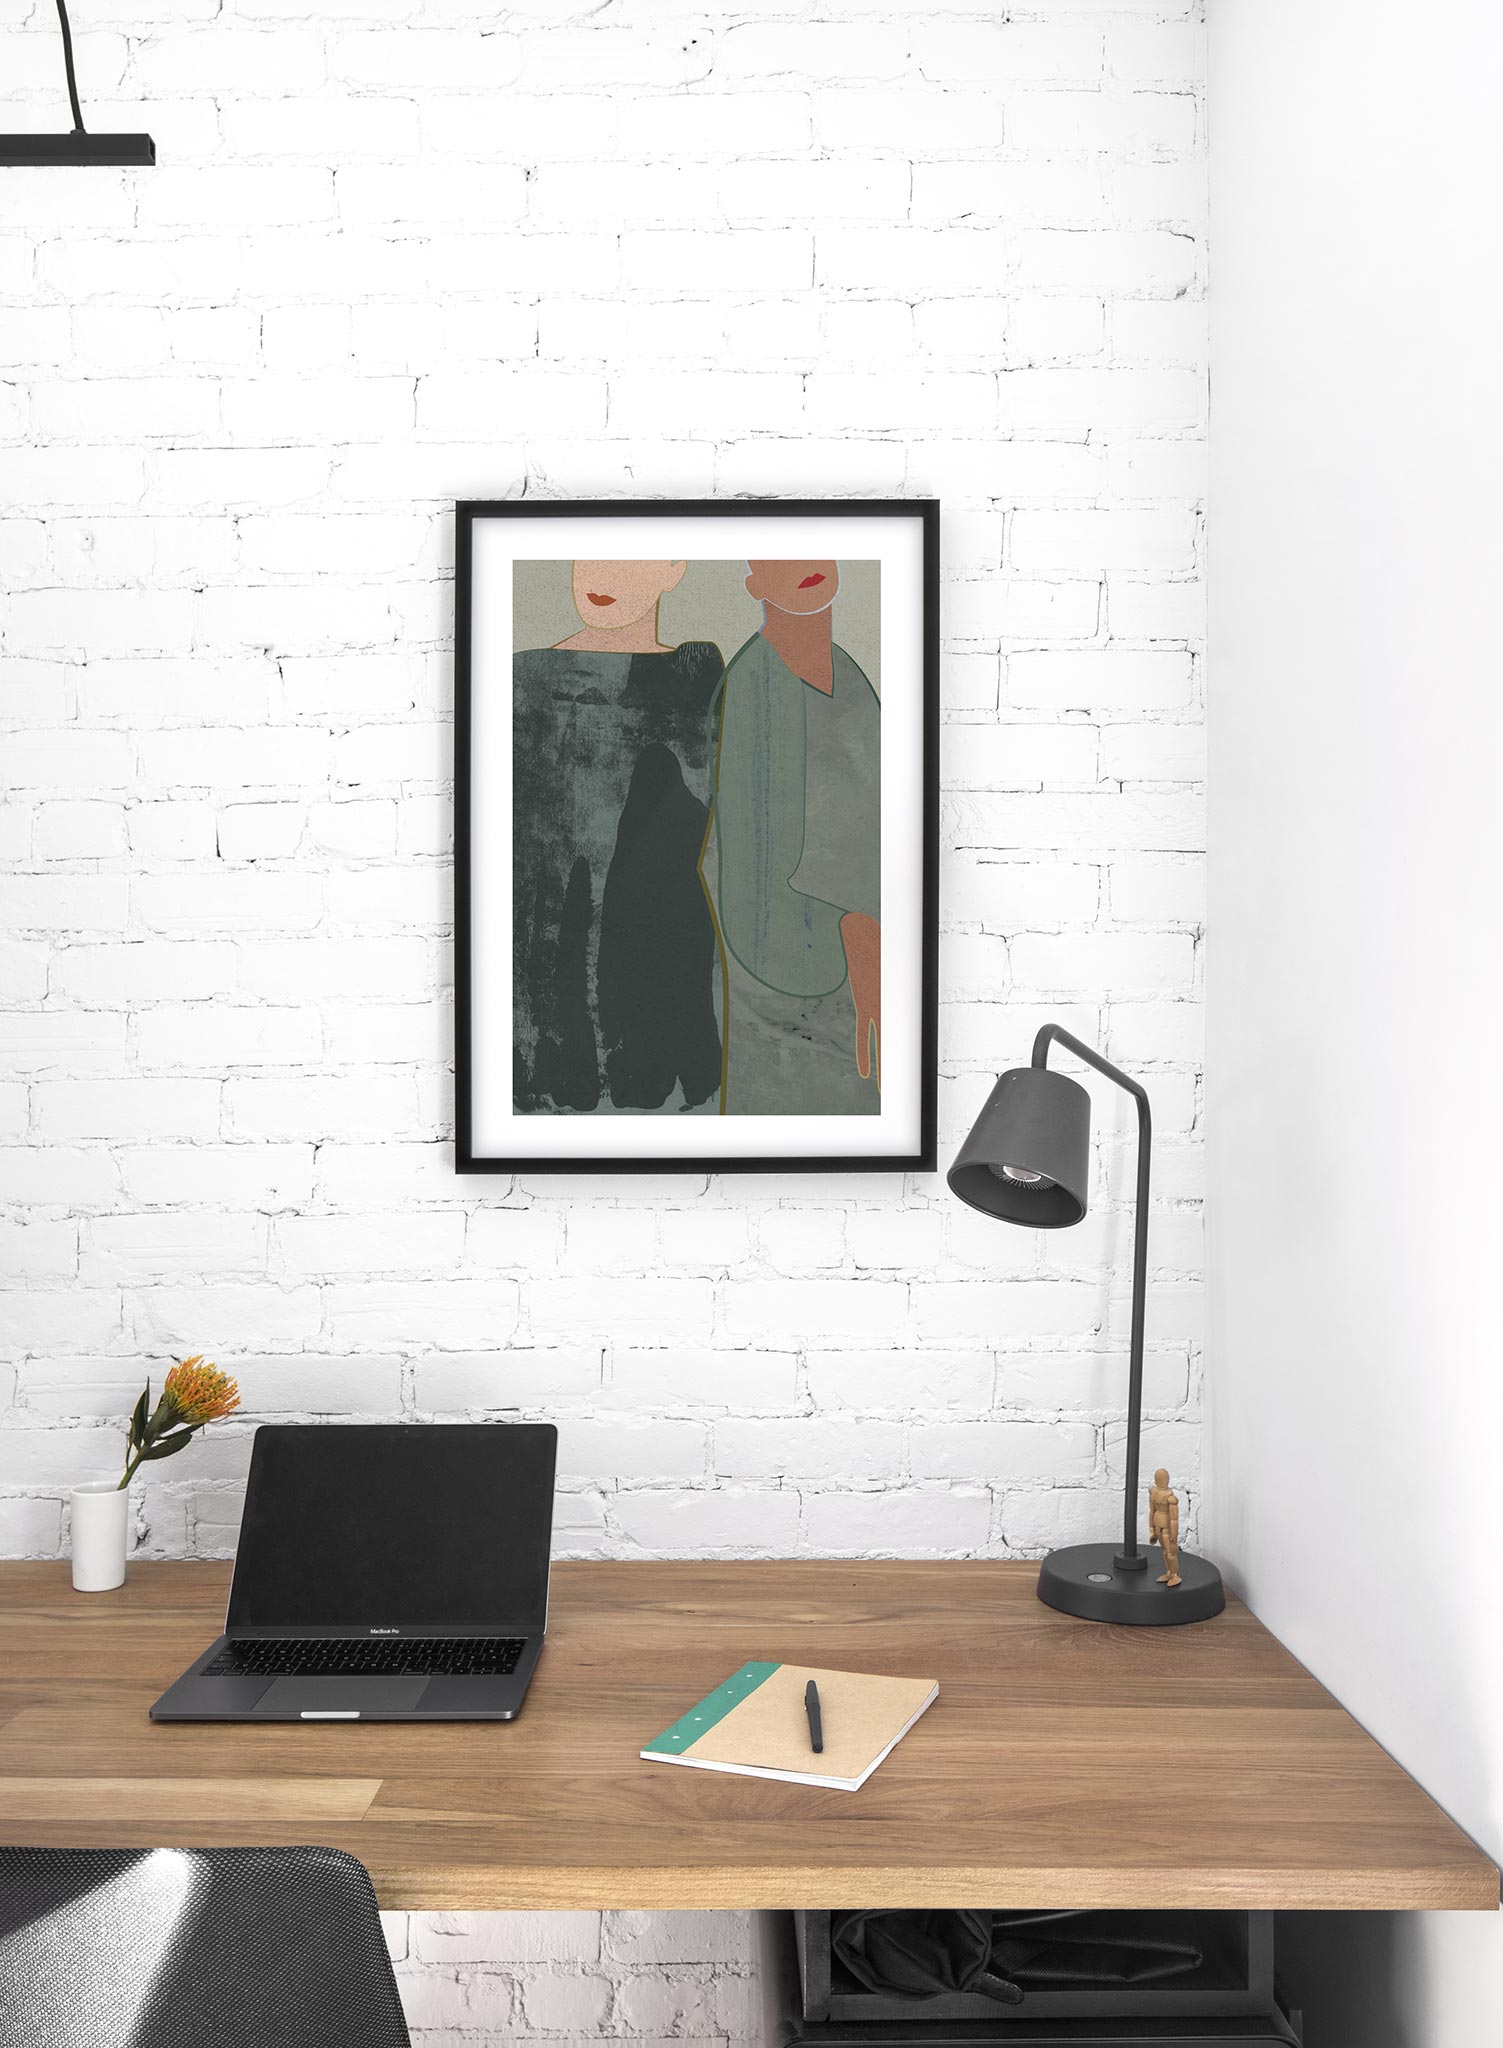 Fashion illustration poster by Opposite Wall with drawing of two woman Socialites - Lifestyle - Office Desk